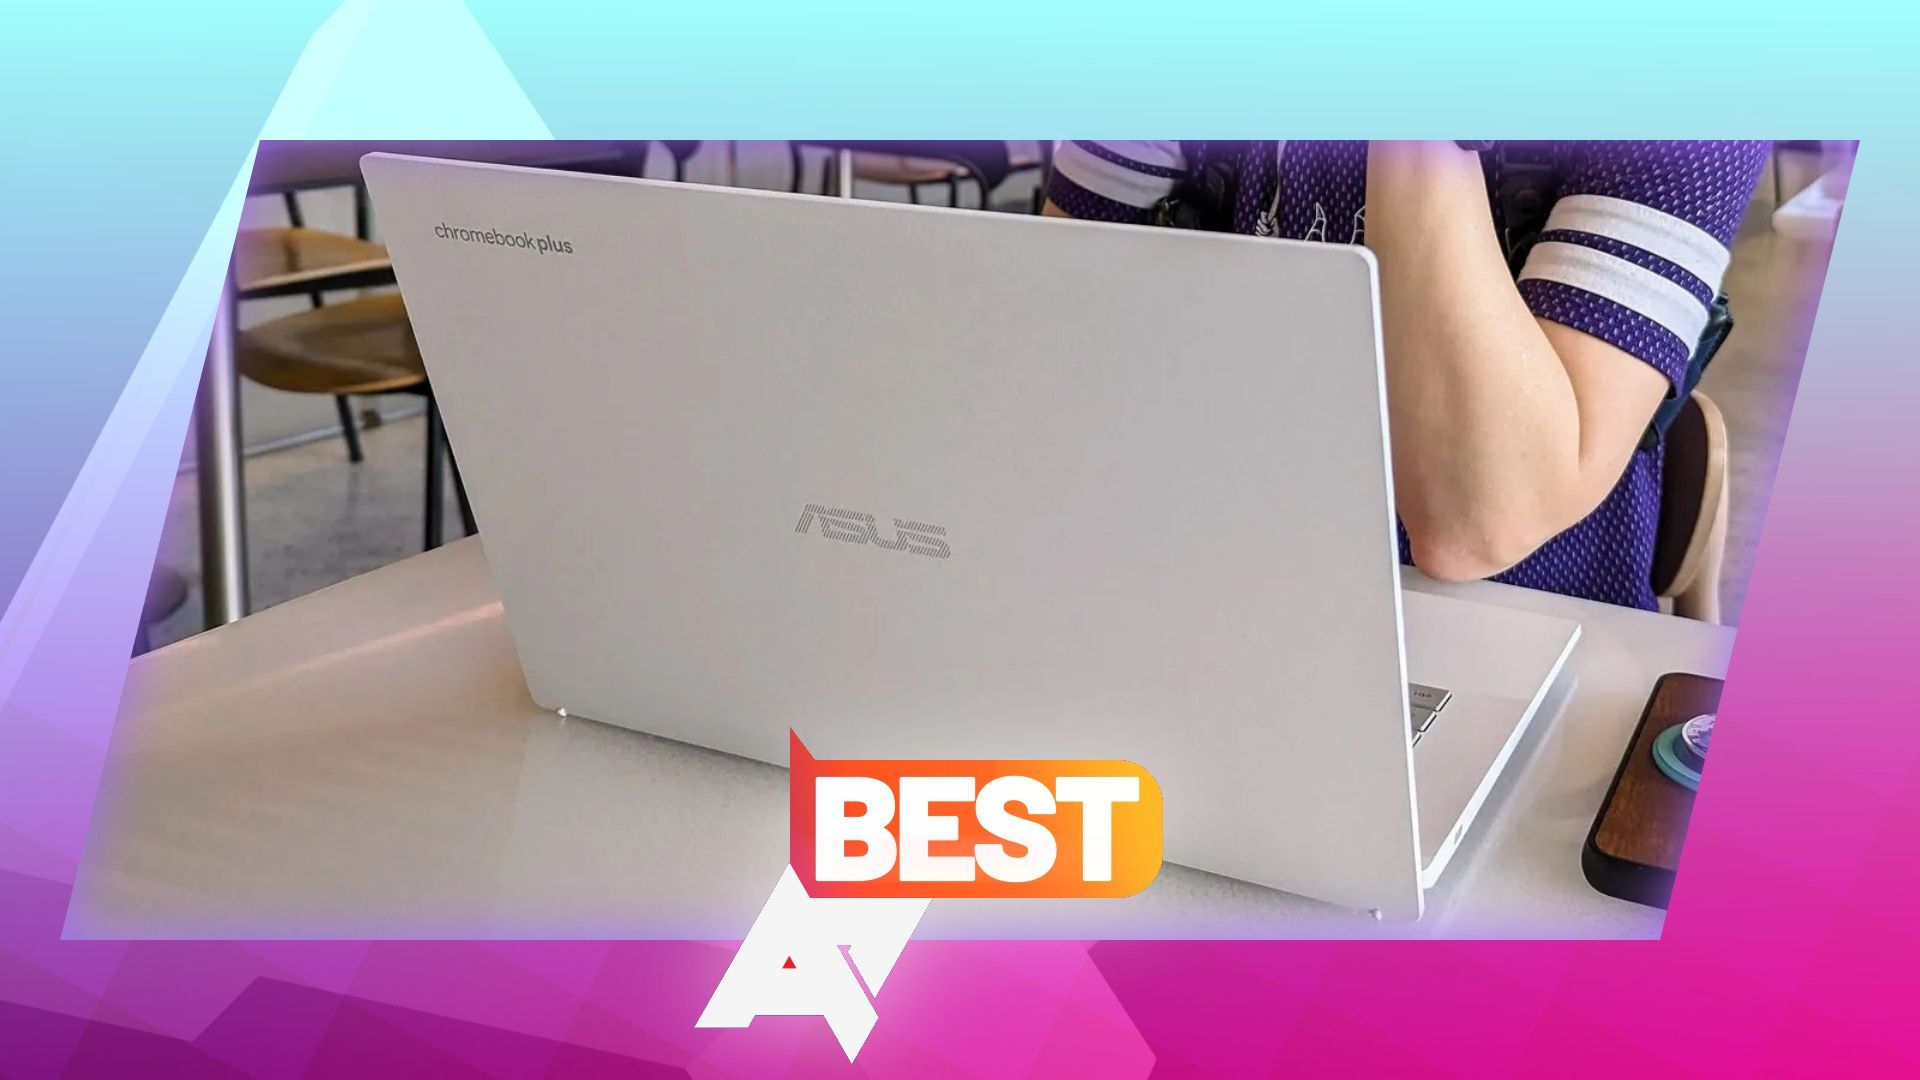 This big-screen Asus Chromebook deal sounds perfect for mom and dad